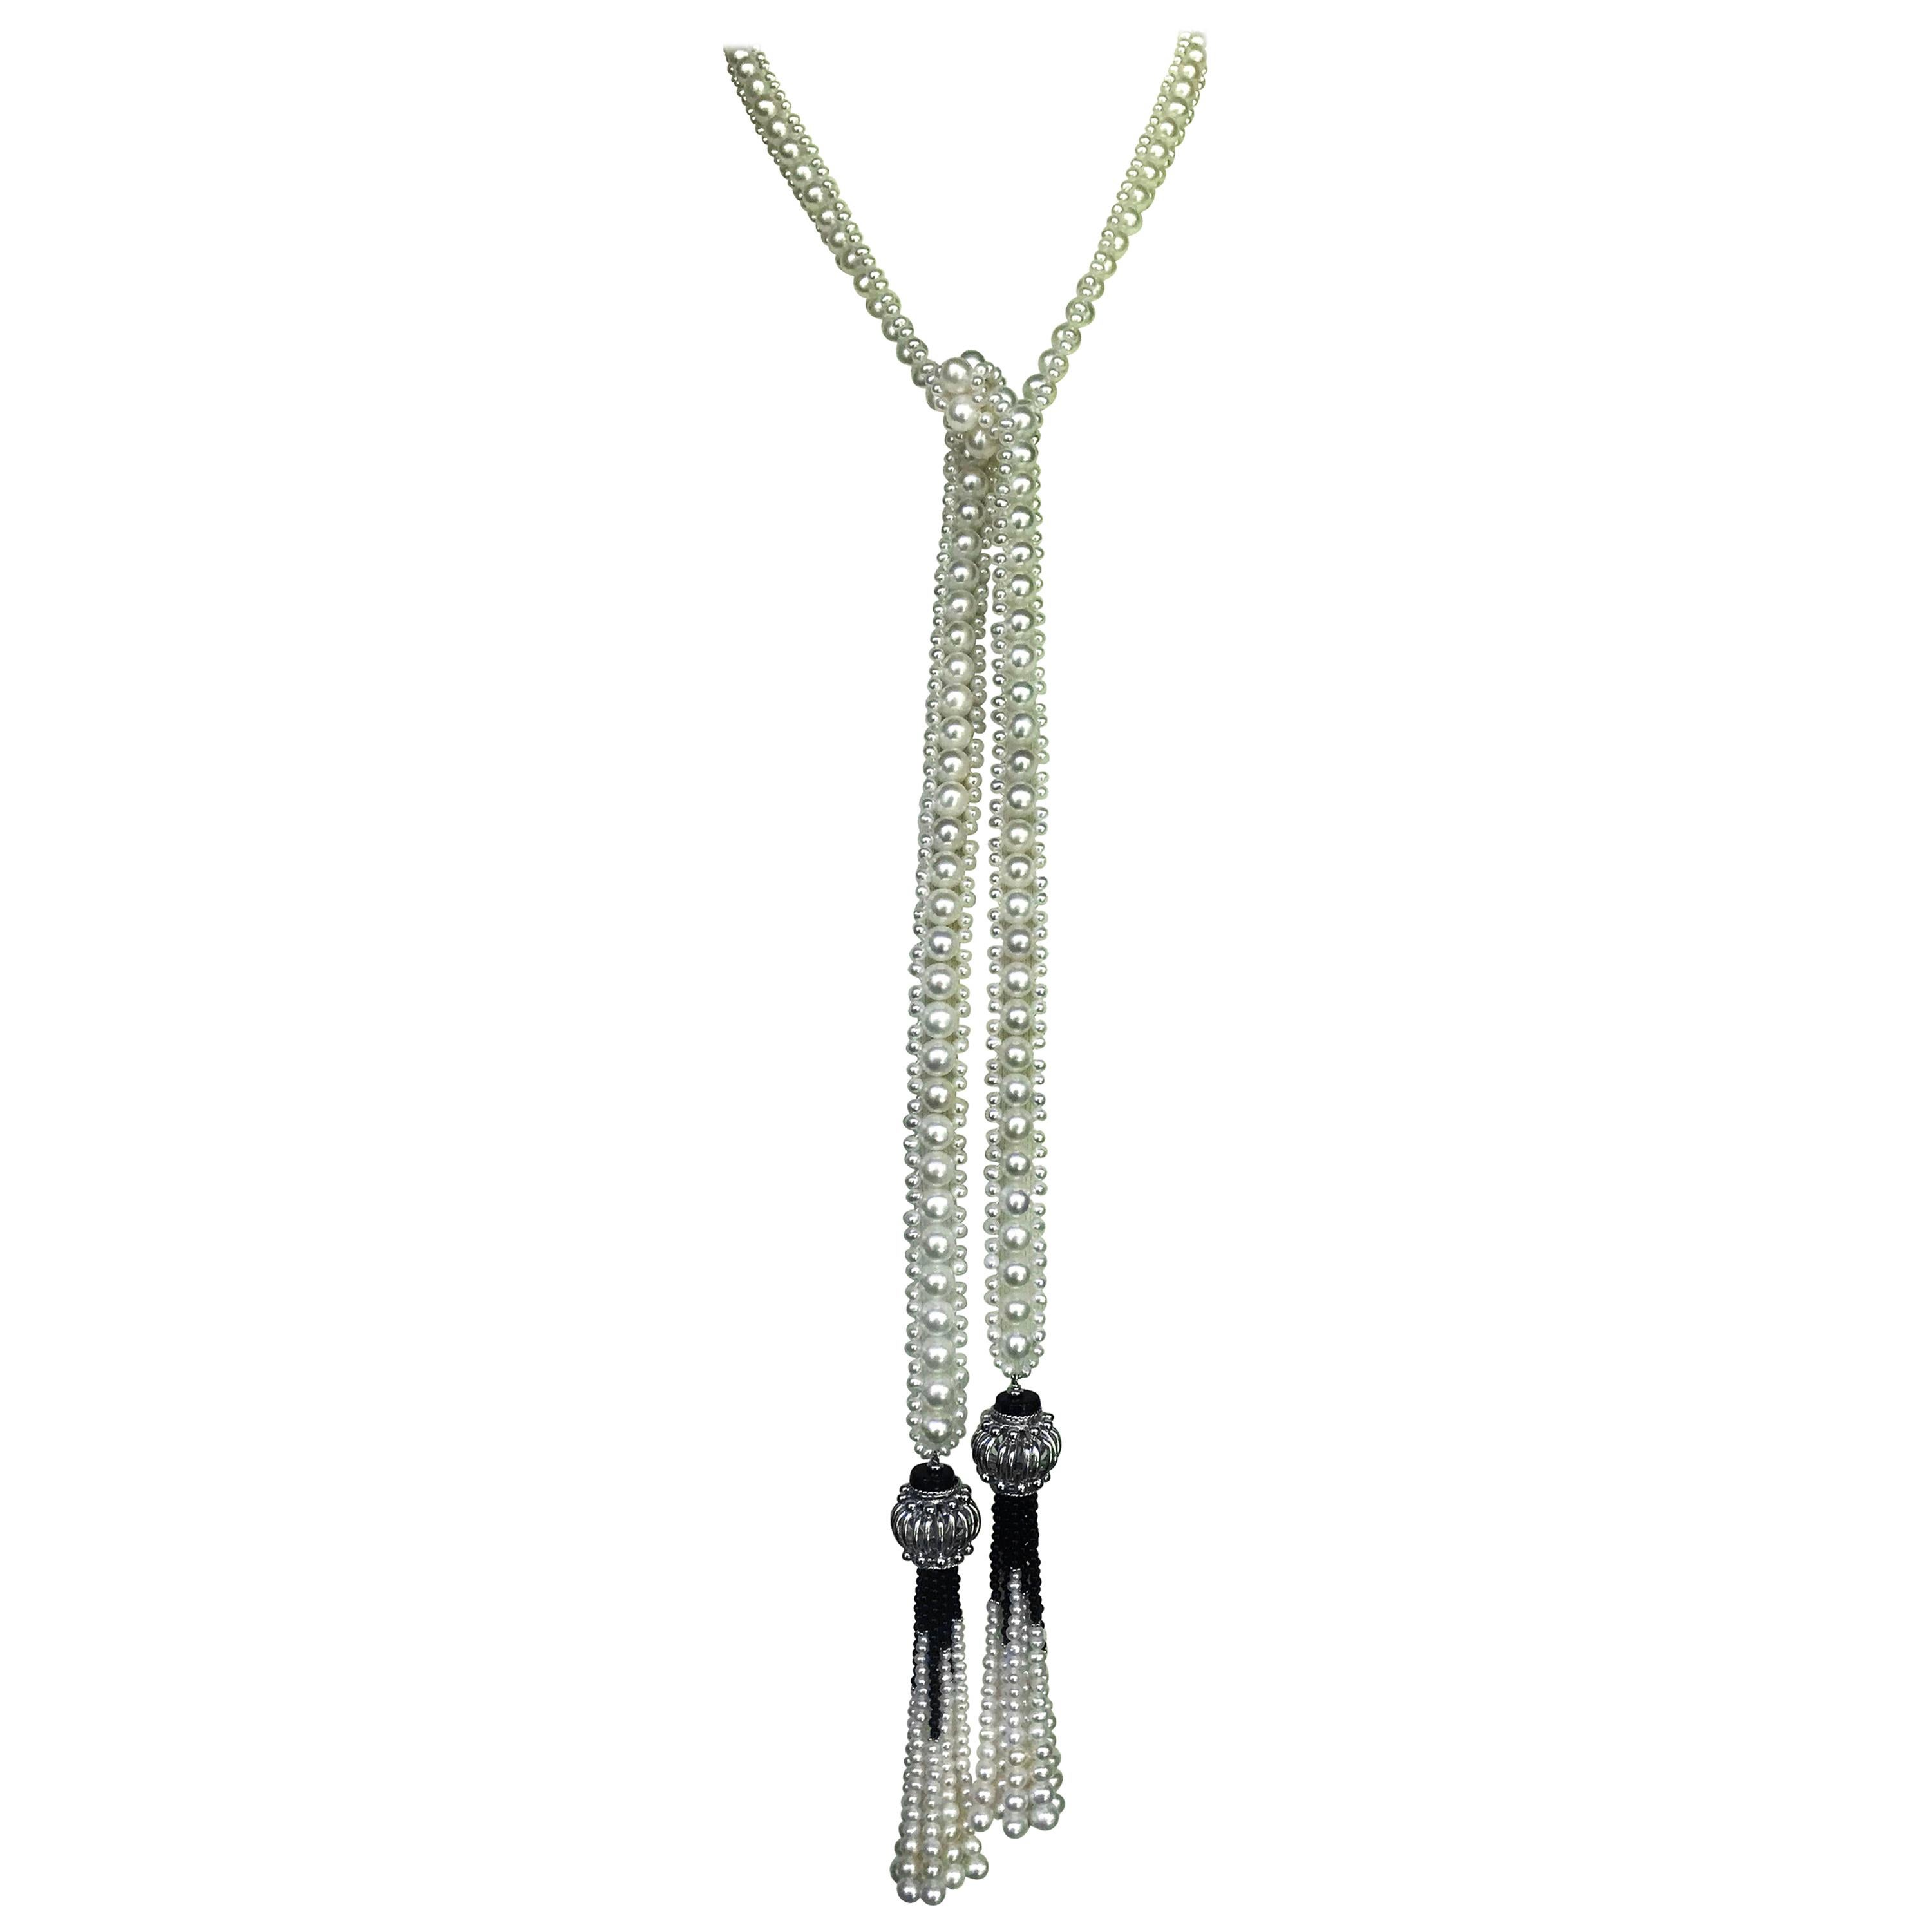 This unique and intricately woven white pearl and onyx sautoir is beautiful, elegant, and versatile. The necklace is made of 2.5mm and 6.5mm white pearls, maintaining a classical look. The tassel strands are made of fine graduated faceted onyx beads